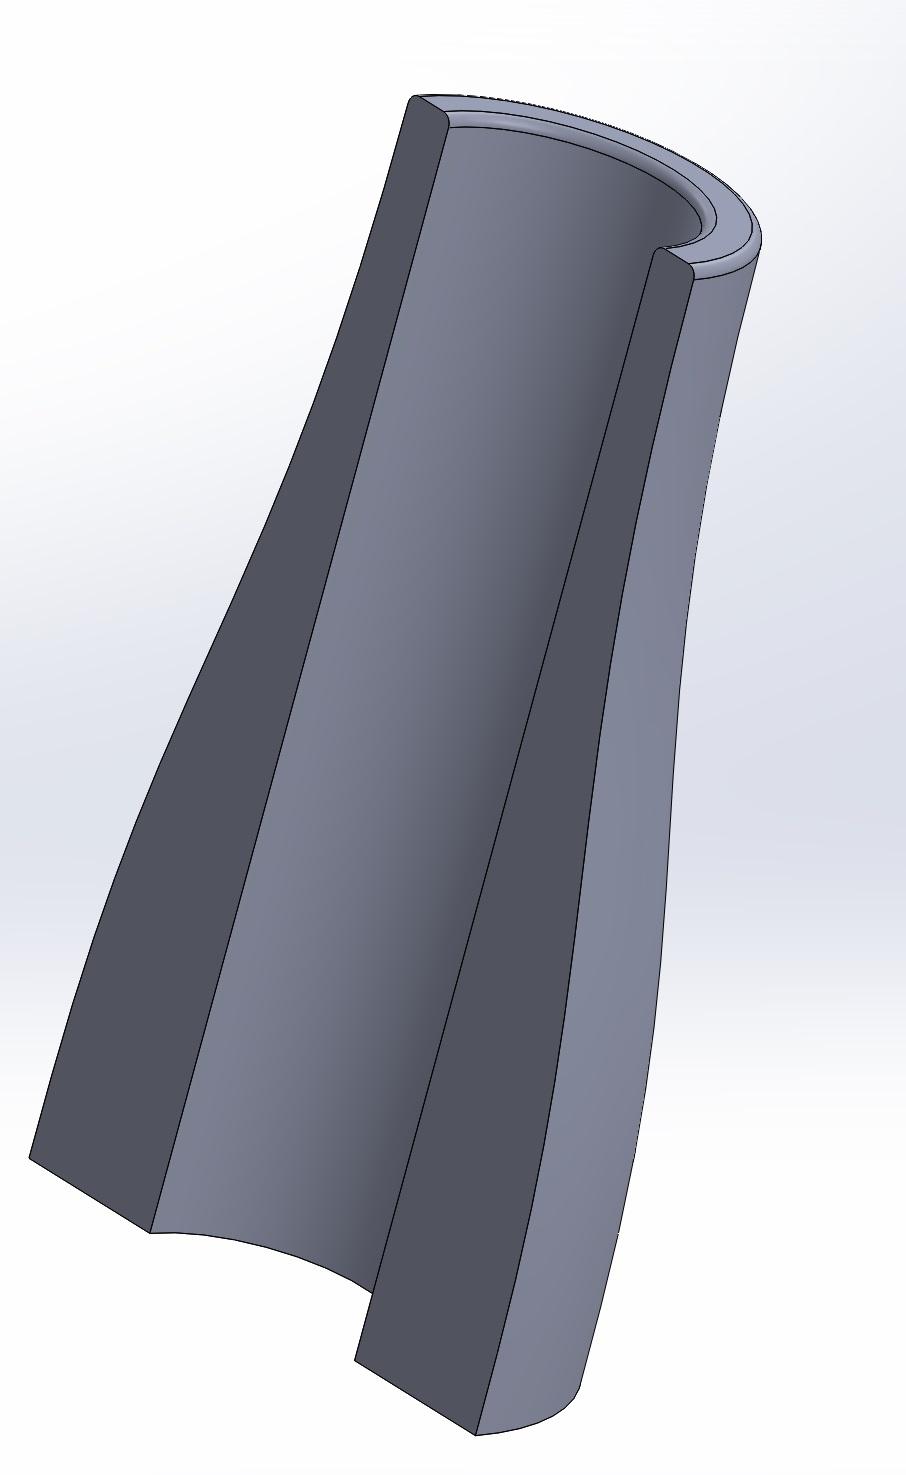 FIG. 4: The reference round nozzle used in the experiment with a diameter of 2.54 cm. facilitate fast and flexible manufacturing, the round nozzle is 3D printed with a resolution of 0.1 mm.